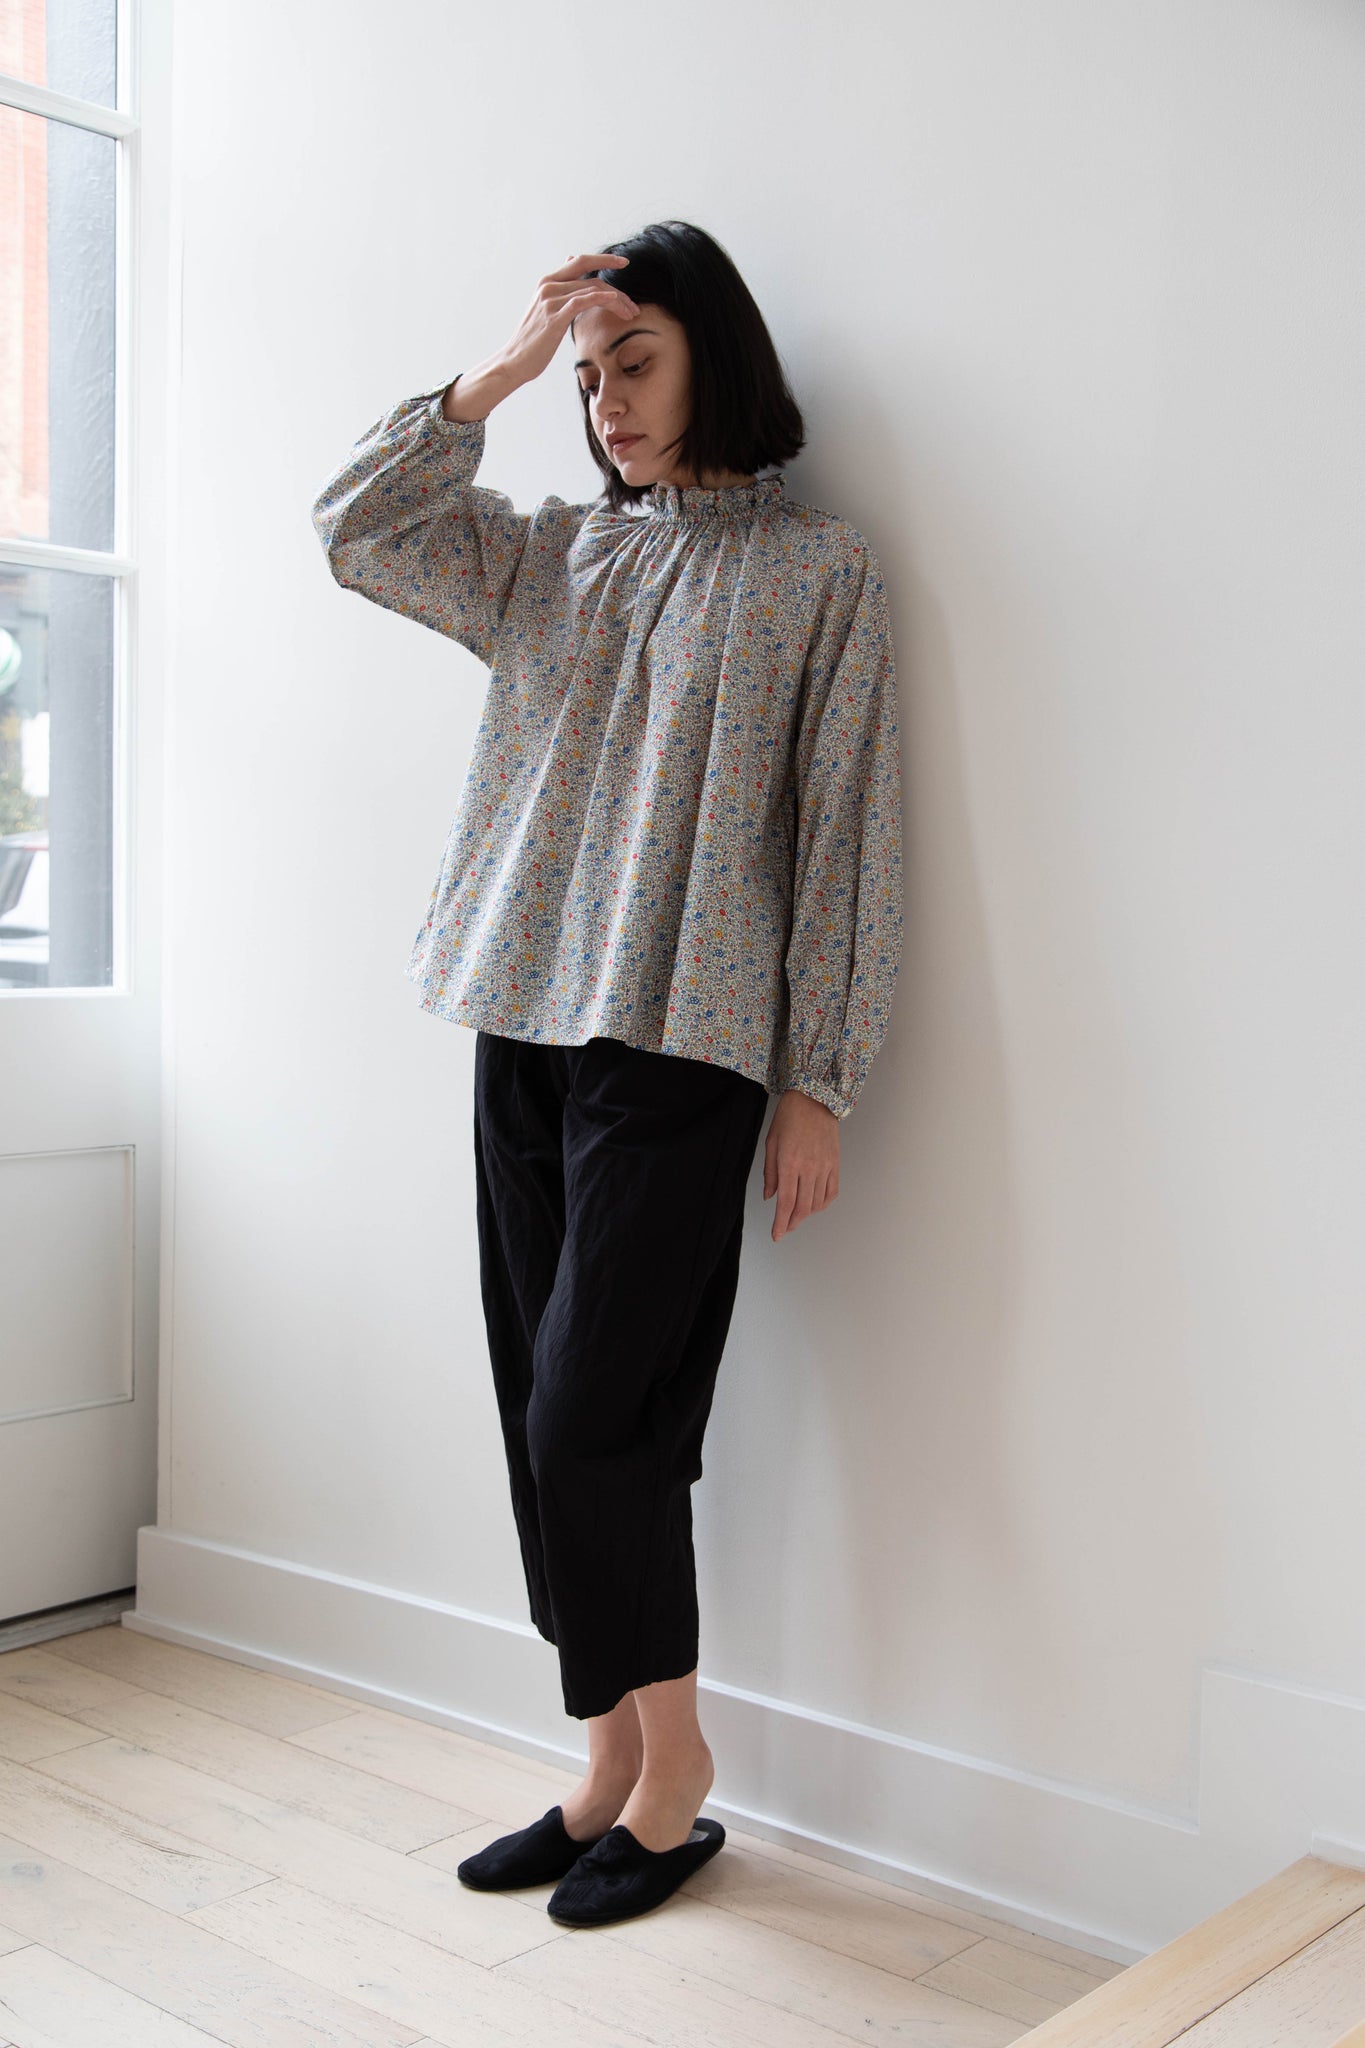 Gauze | Liberty of London Frill Blouse in Katie & Millie